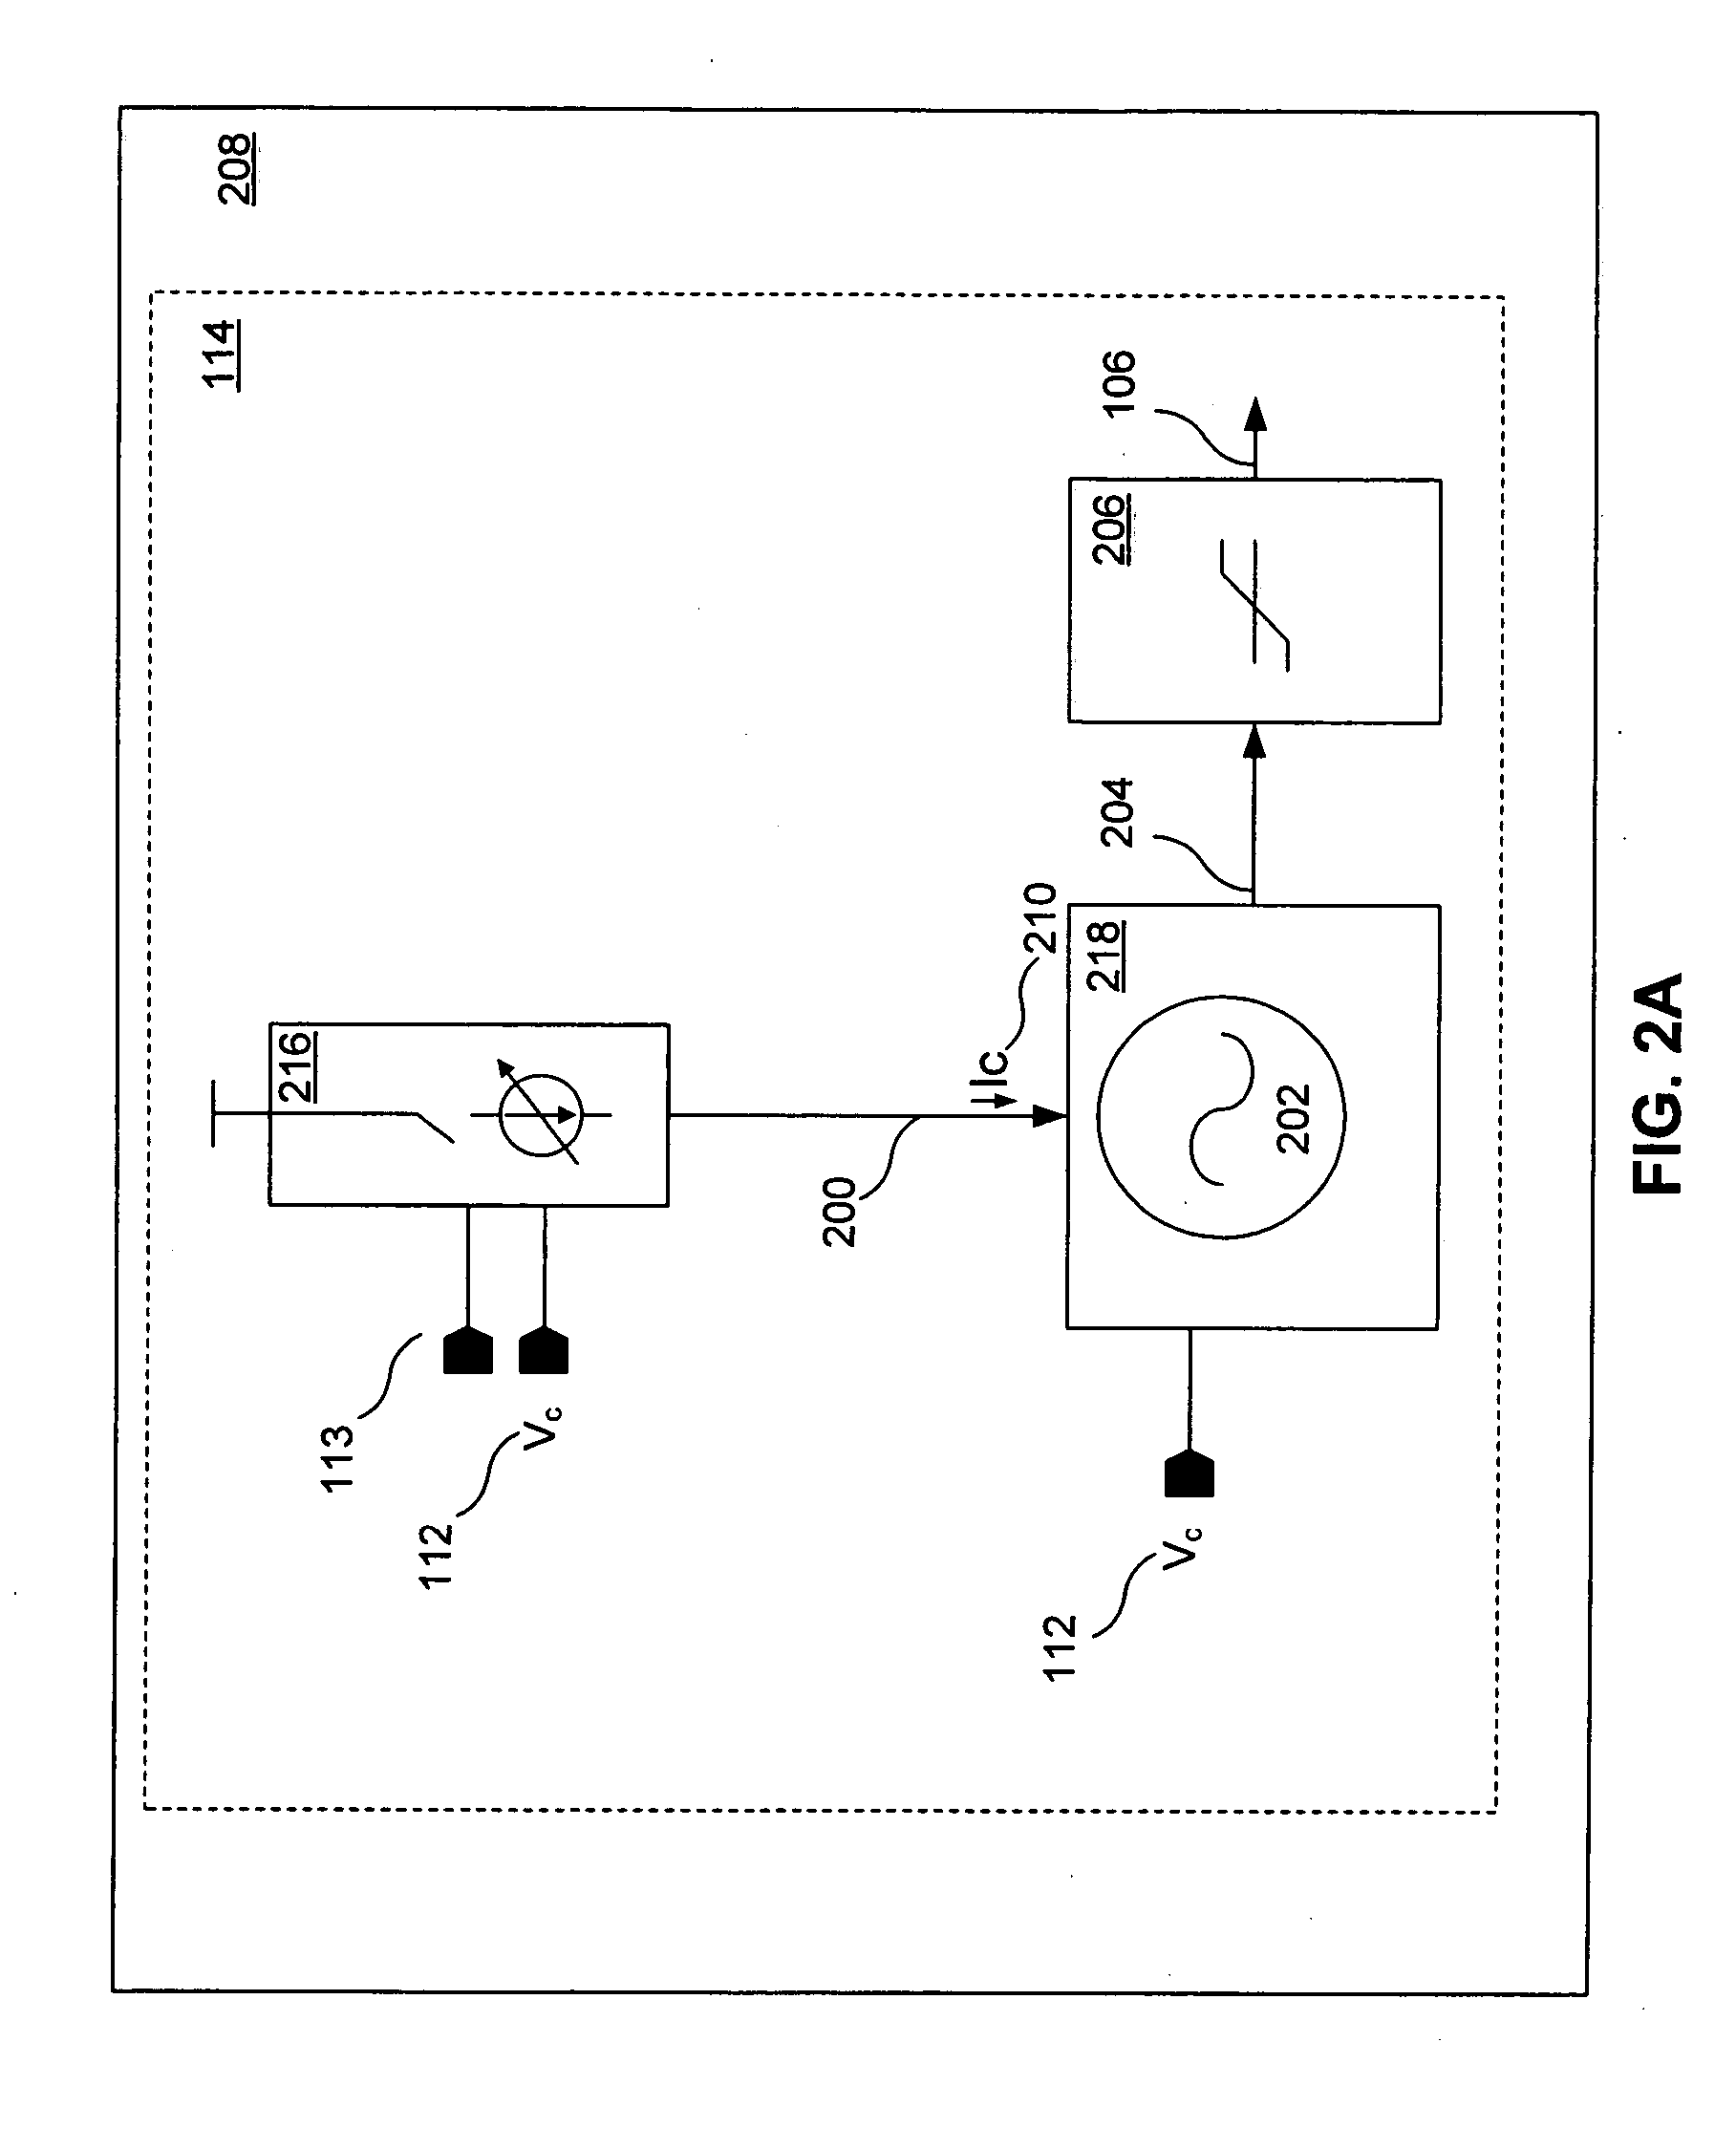 Voltage controlled oscillator with variable control sensitivity